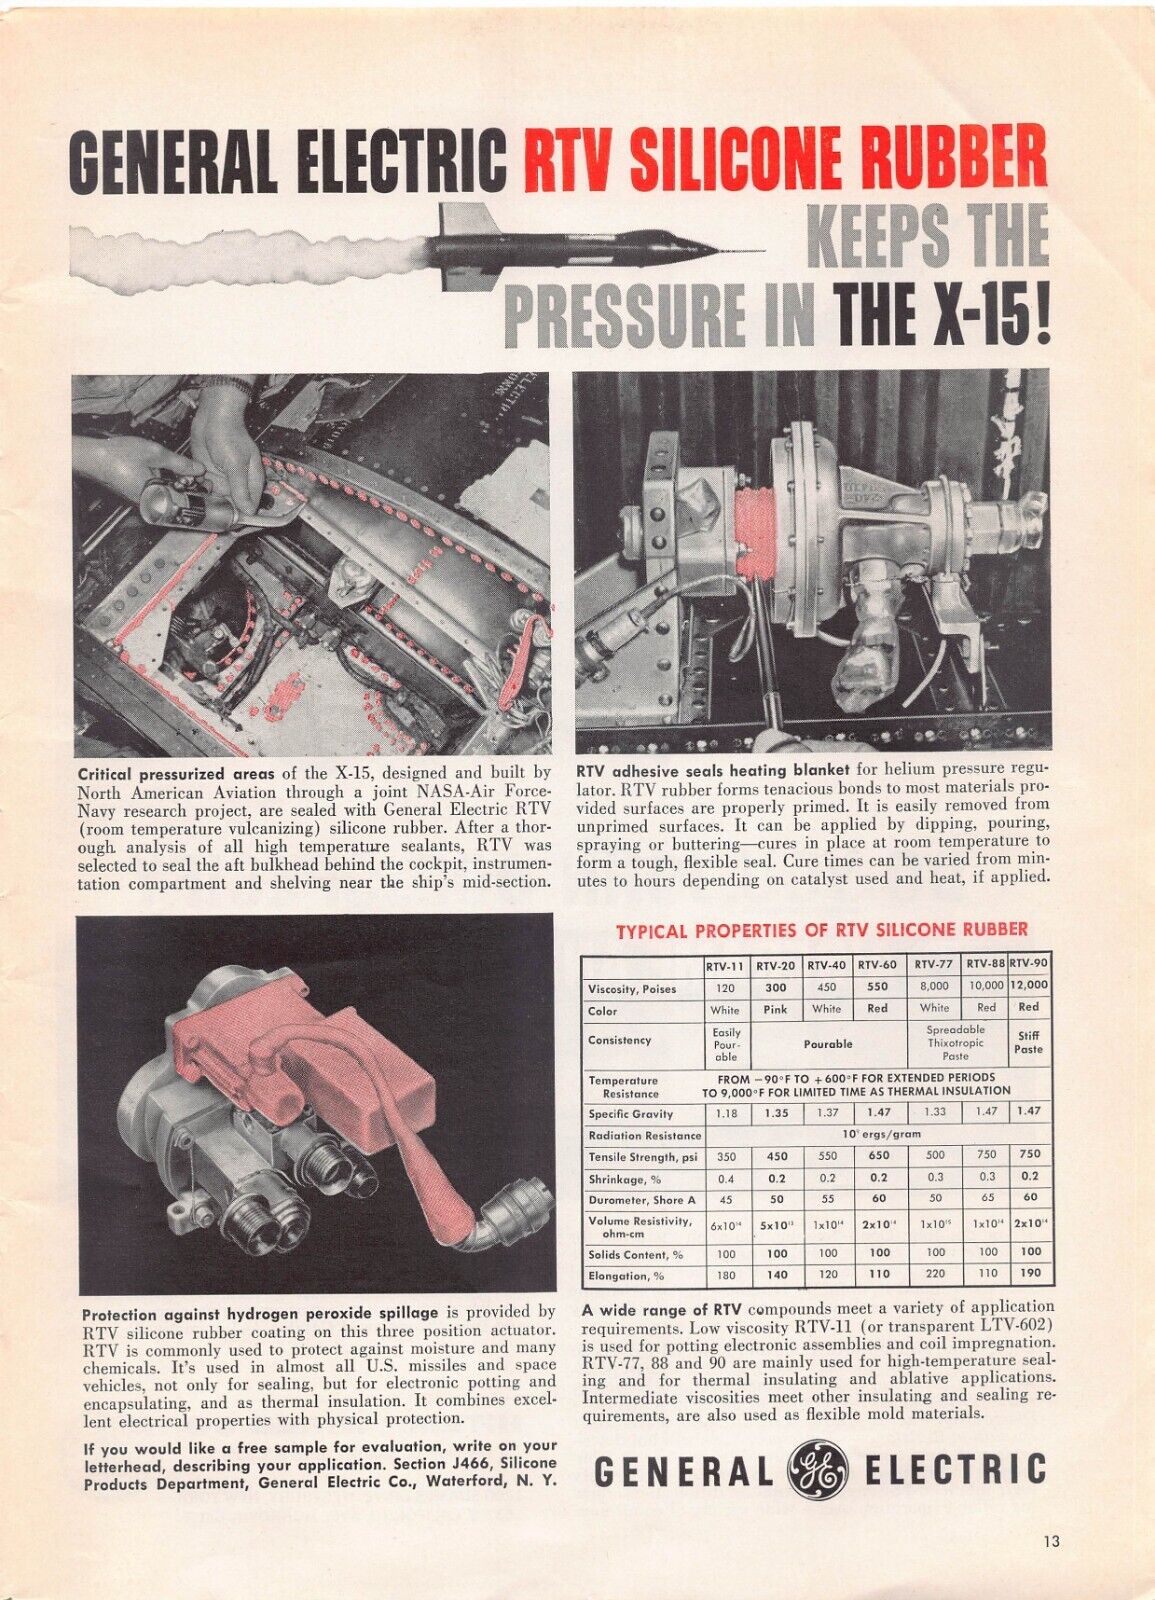 General Electric GE X-15 Aircraft Missile RTV Silicone Rubber Vintage Print Ad